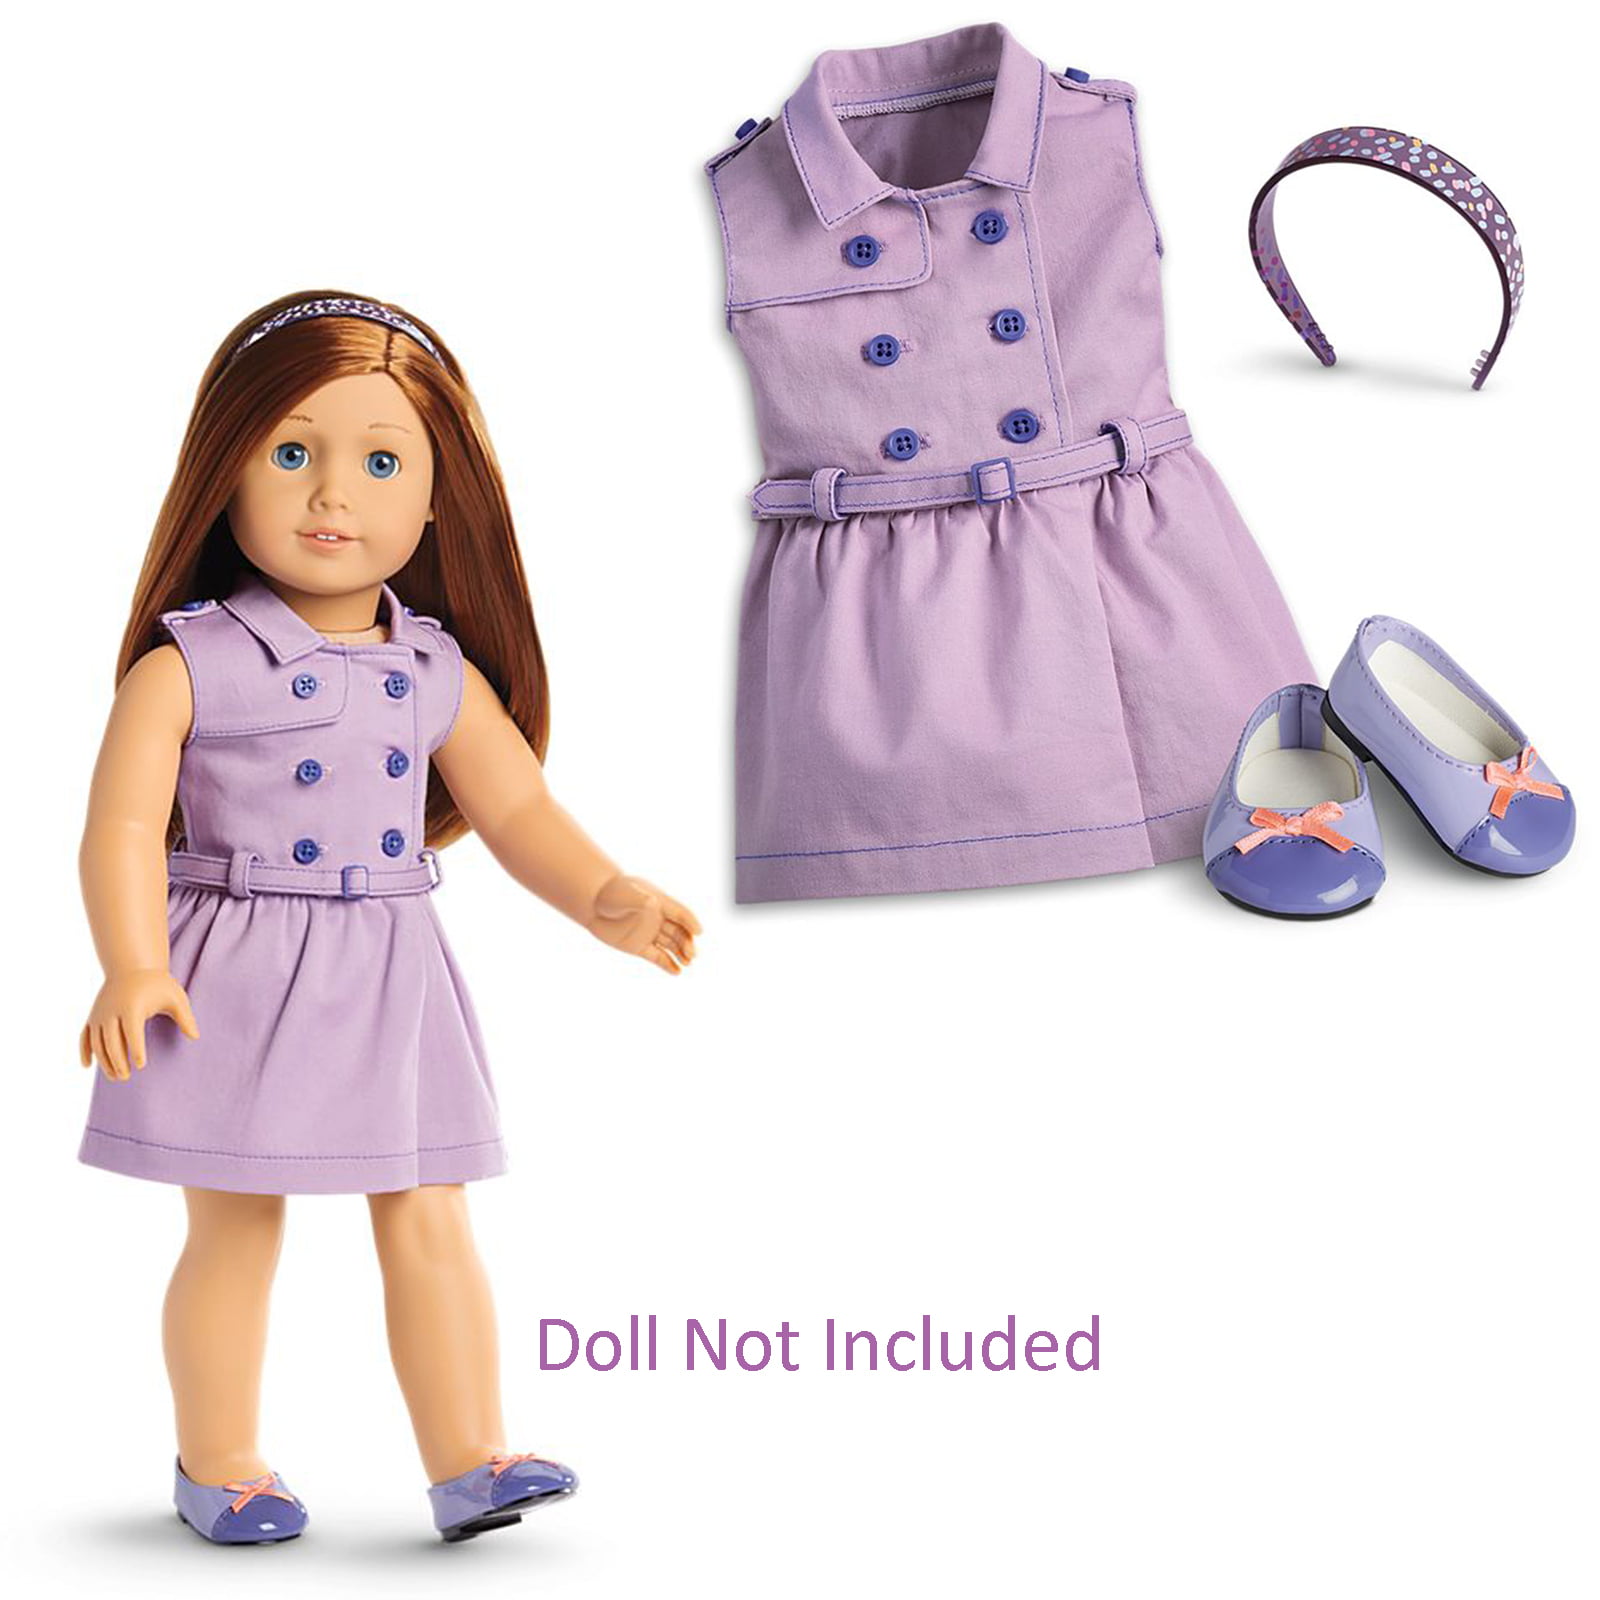 American Girl Truly Me TRAVEL IN STYLE DRESS Outfit Purple ballet shoes headband 